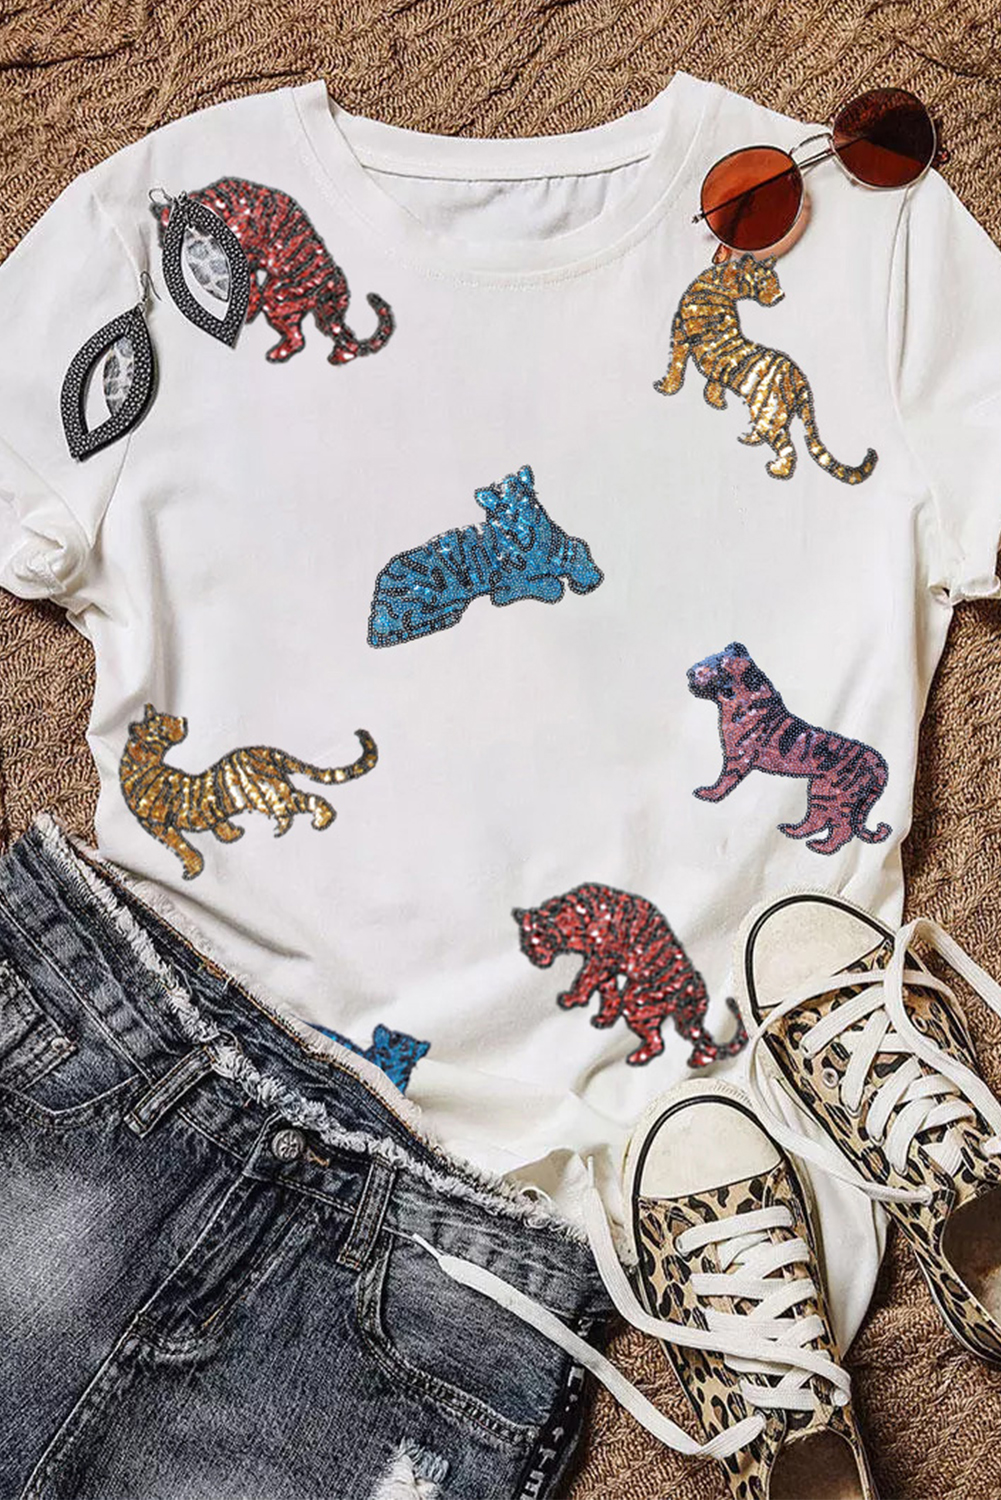 Shewin Wholesale New arrival White Sequin Tiger Patch Graphic Round Neck T SHIRT